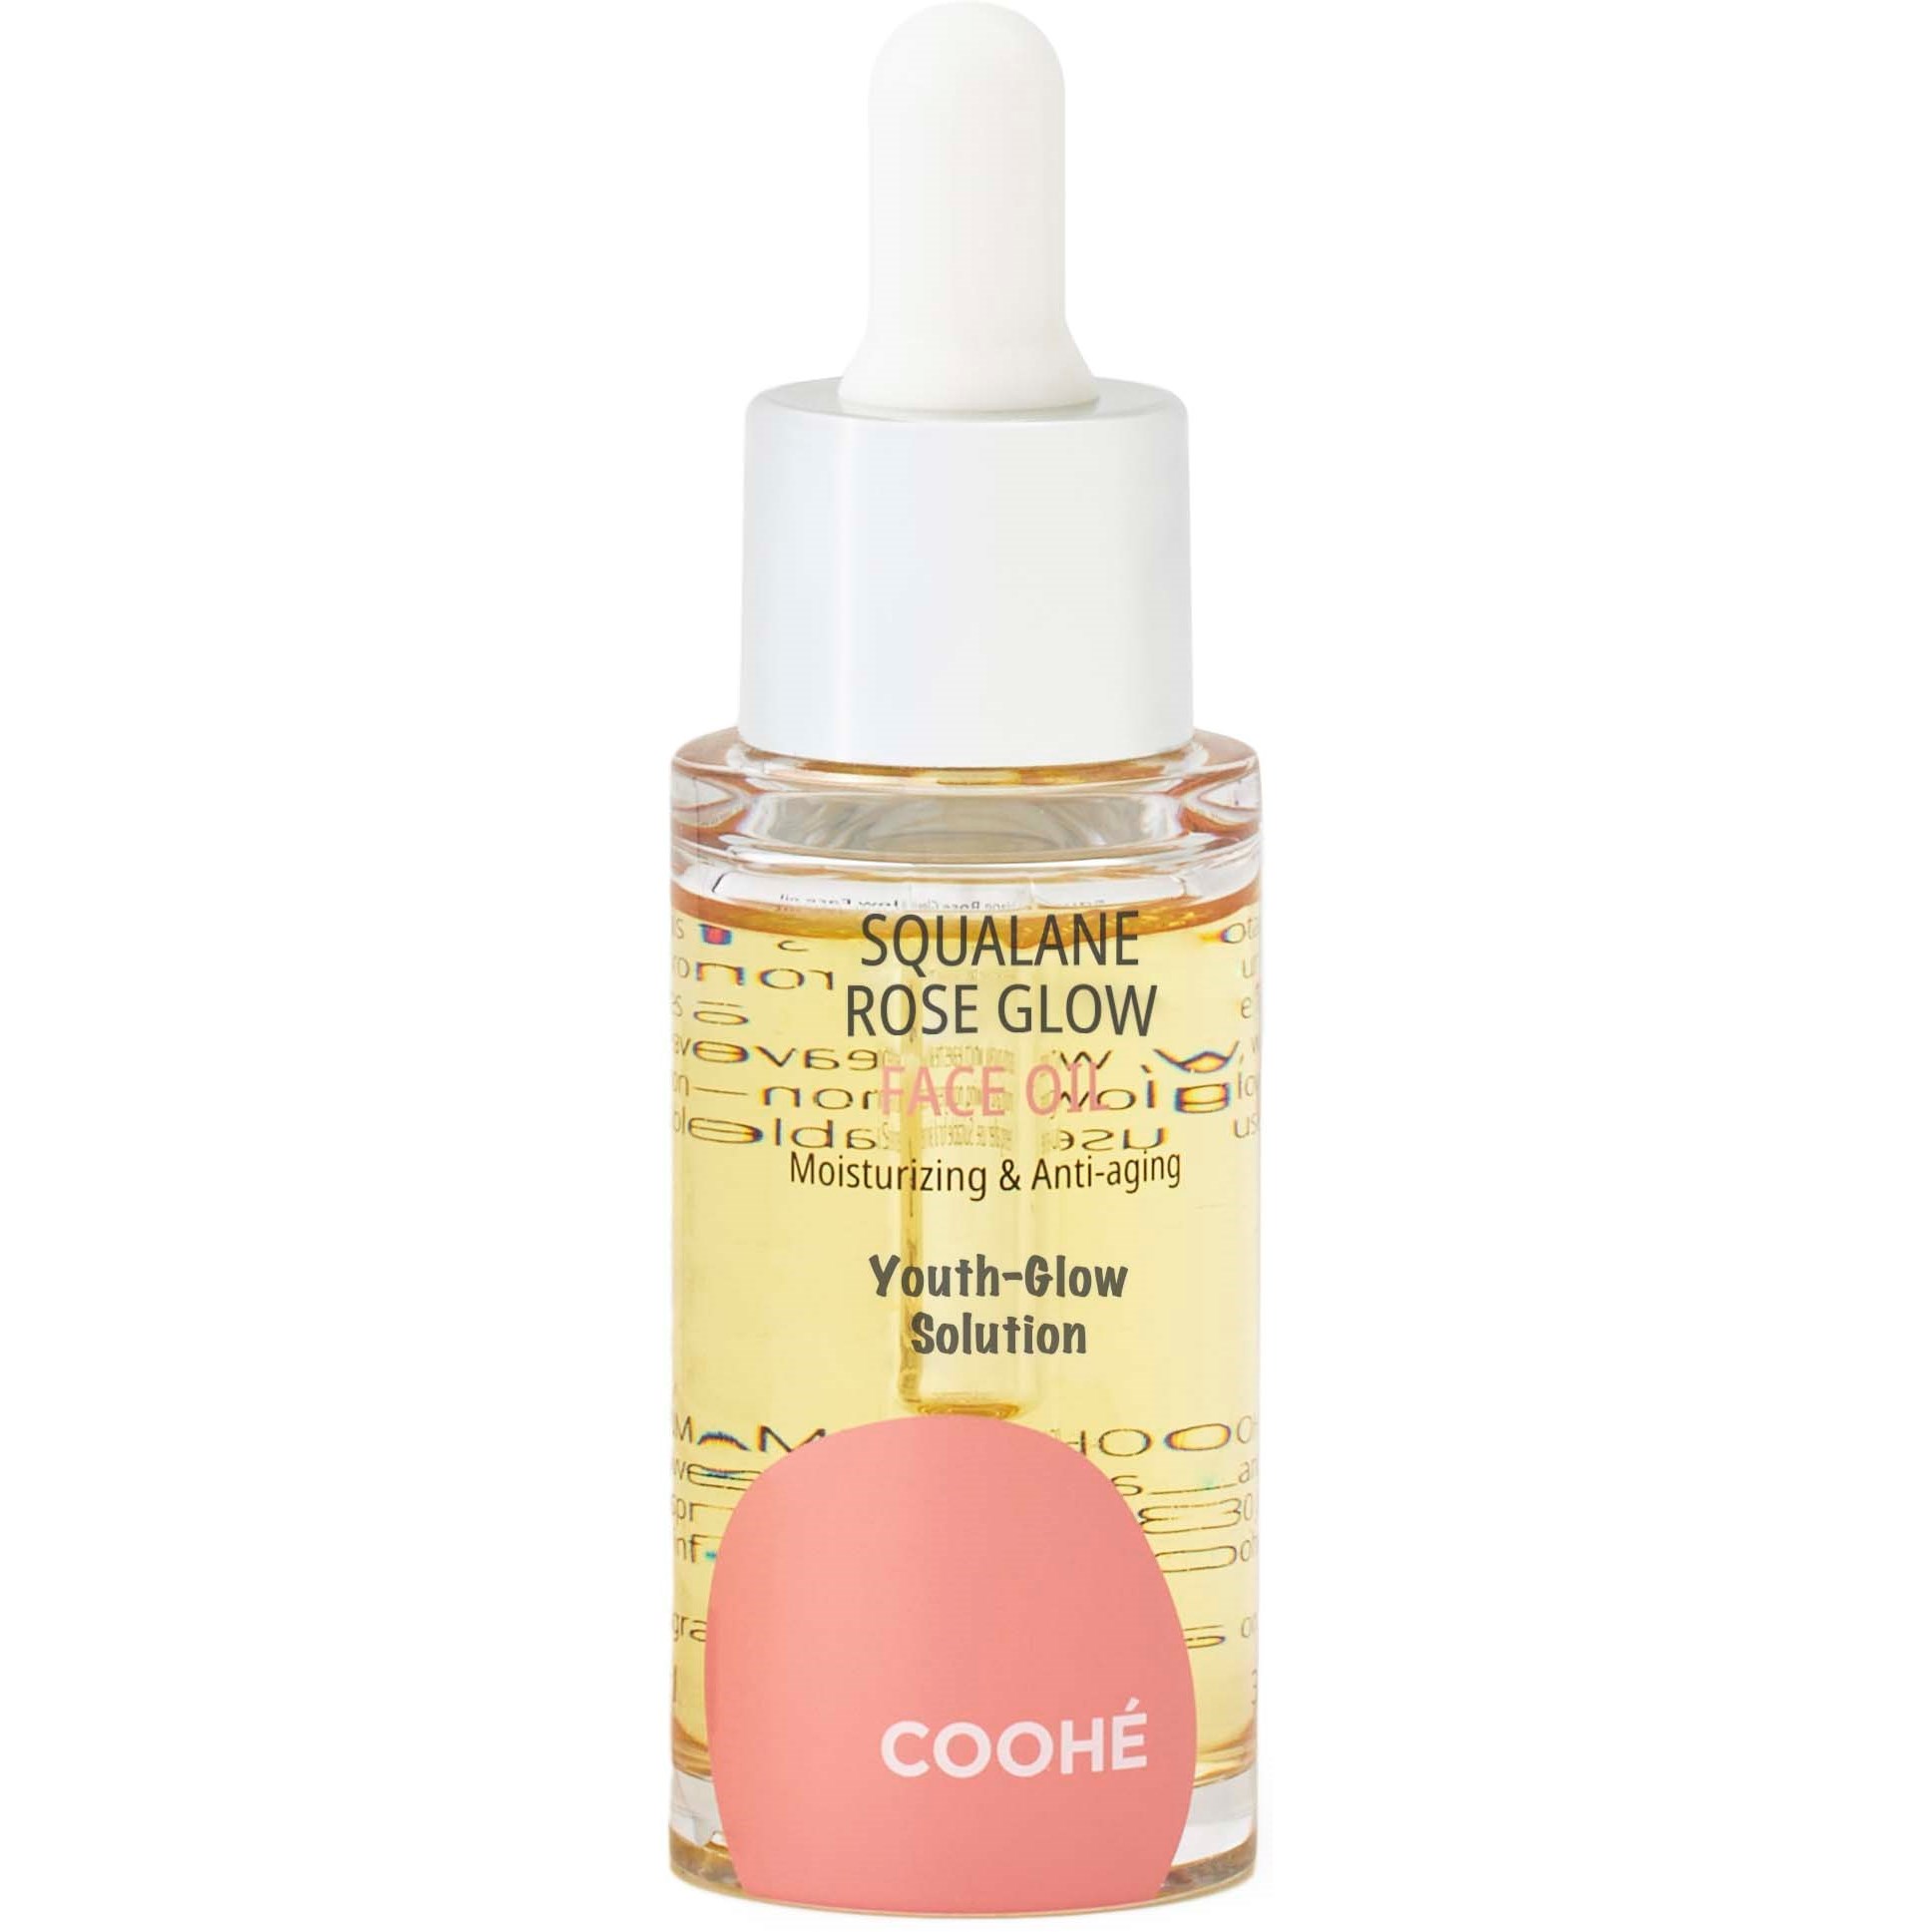 Bilde av Coohé Youth-glow Solution Squalane Rose Glow Face Oil 30 Ml